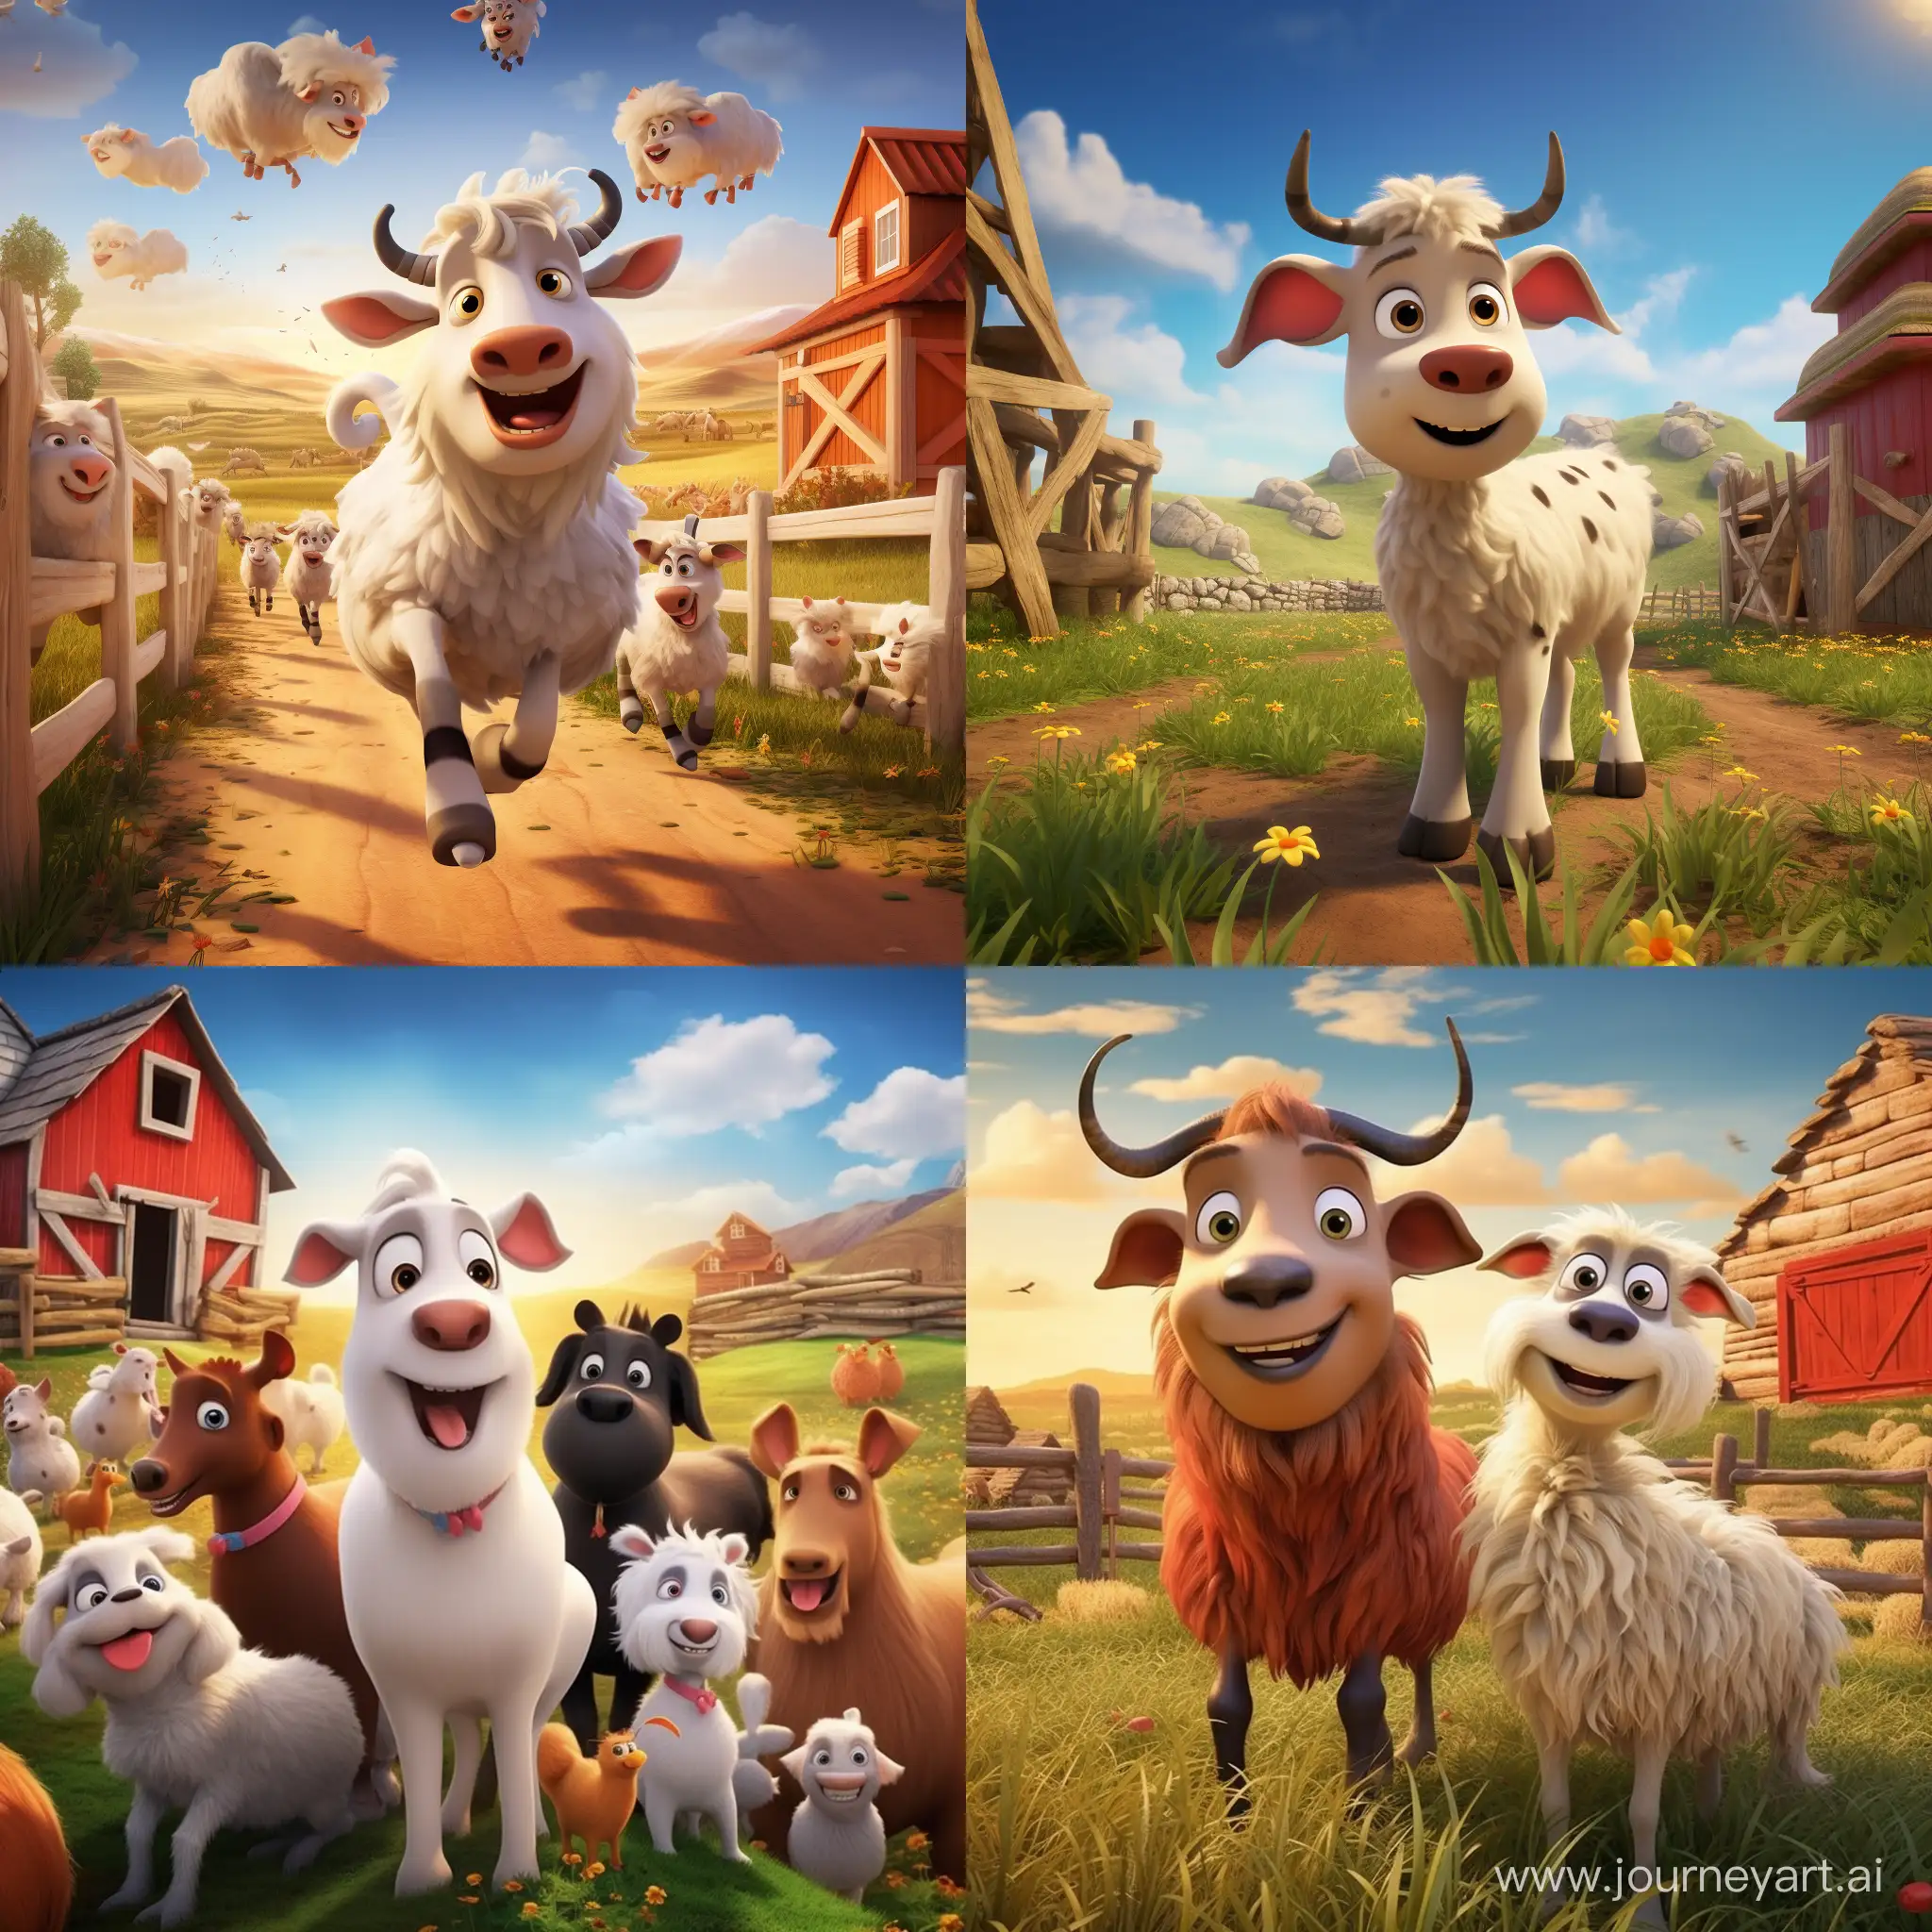 Heartwarming-3D-Animation-Lively-Farm-Tales-with-Cow-Dog-Sheep-and-Chickens